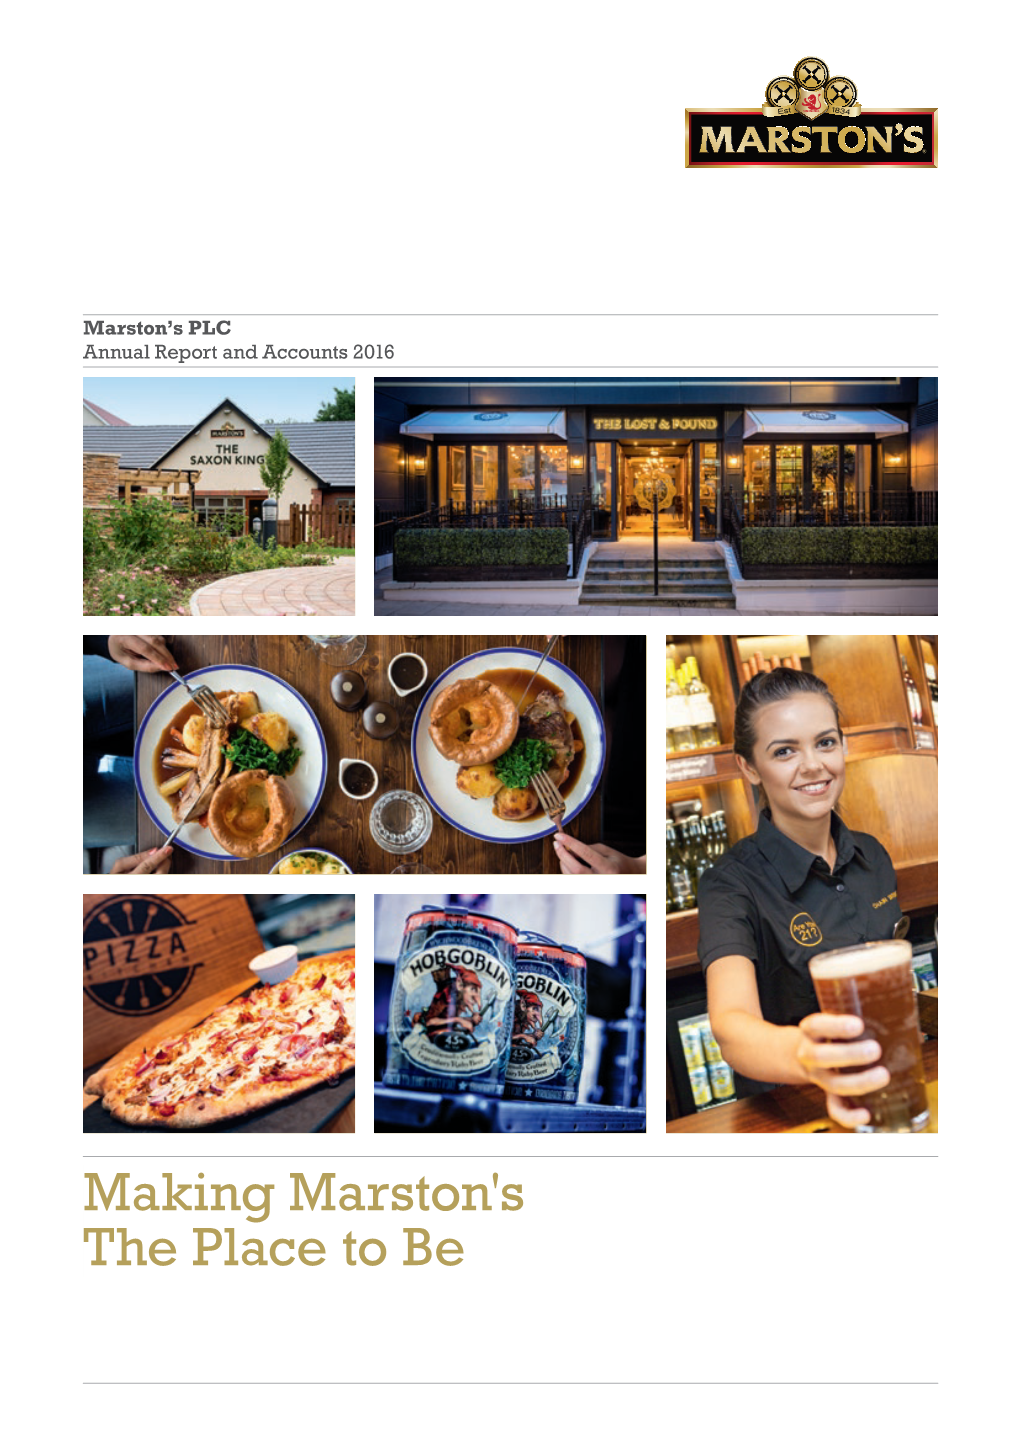 Making Marston's the Place to Be